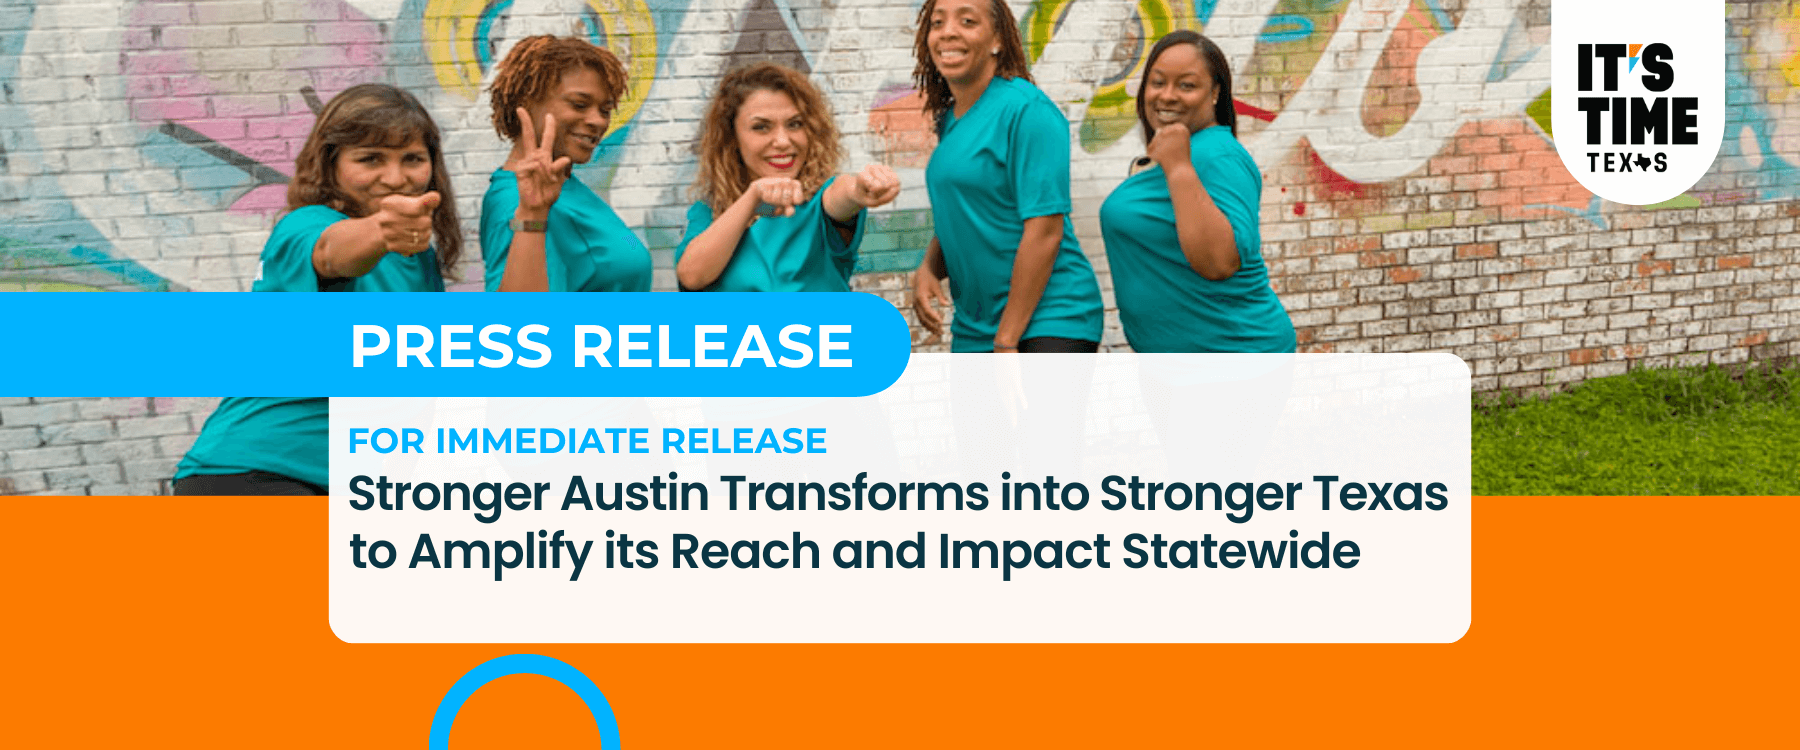 Featured image for “Stronger Austin Transforms into Stronger Texas to Amplify its Reach and Impact Statewide”